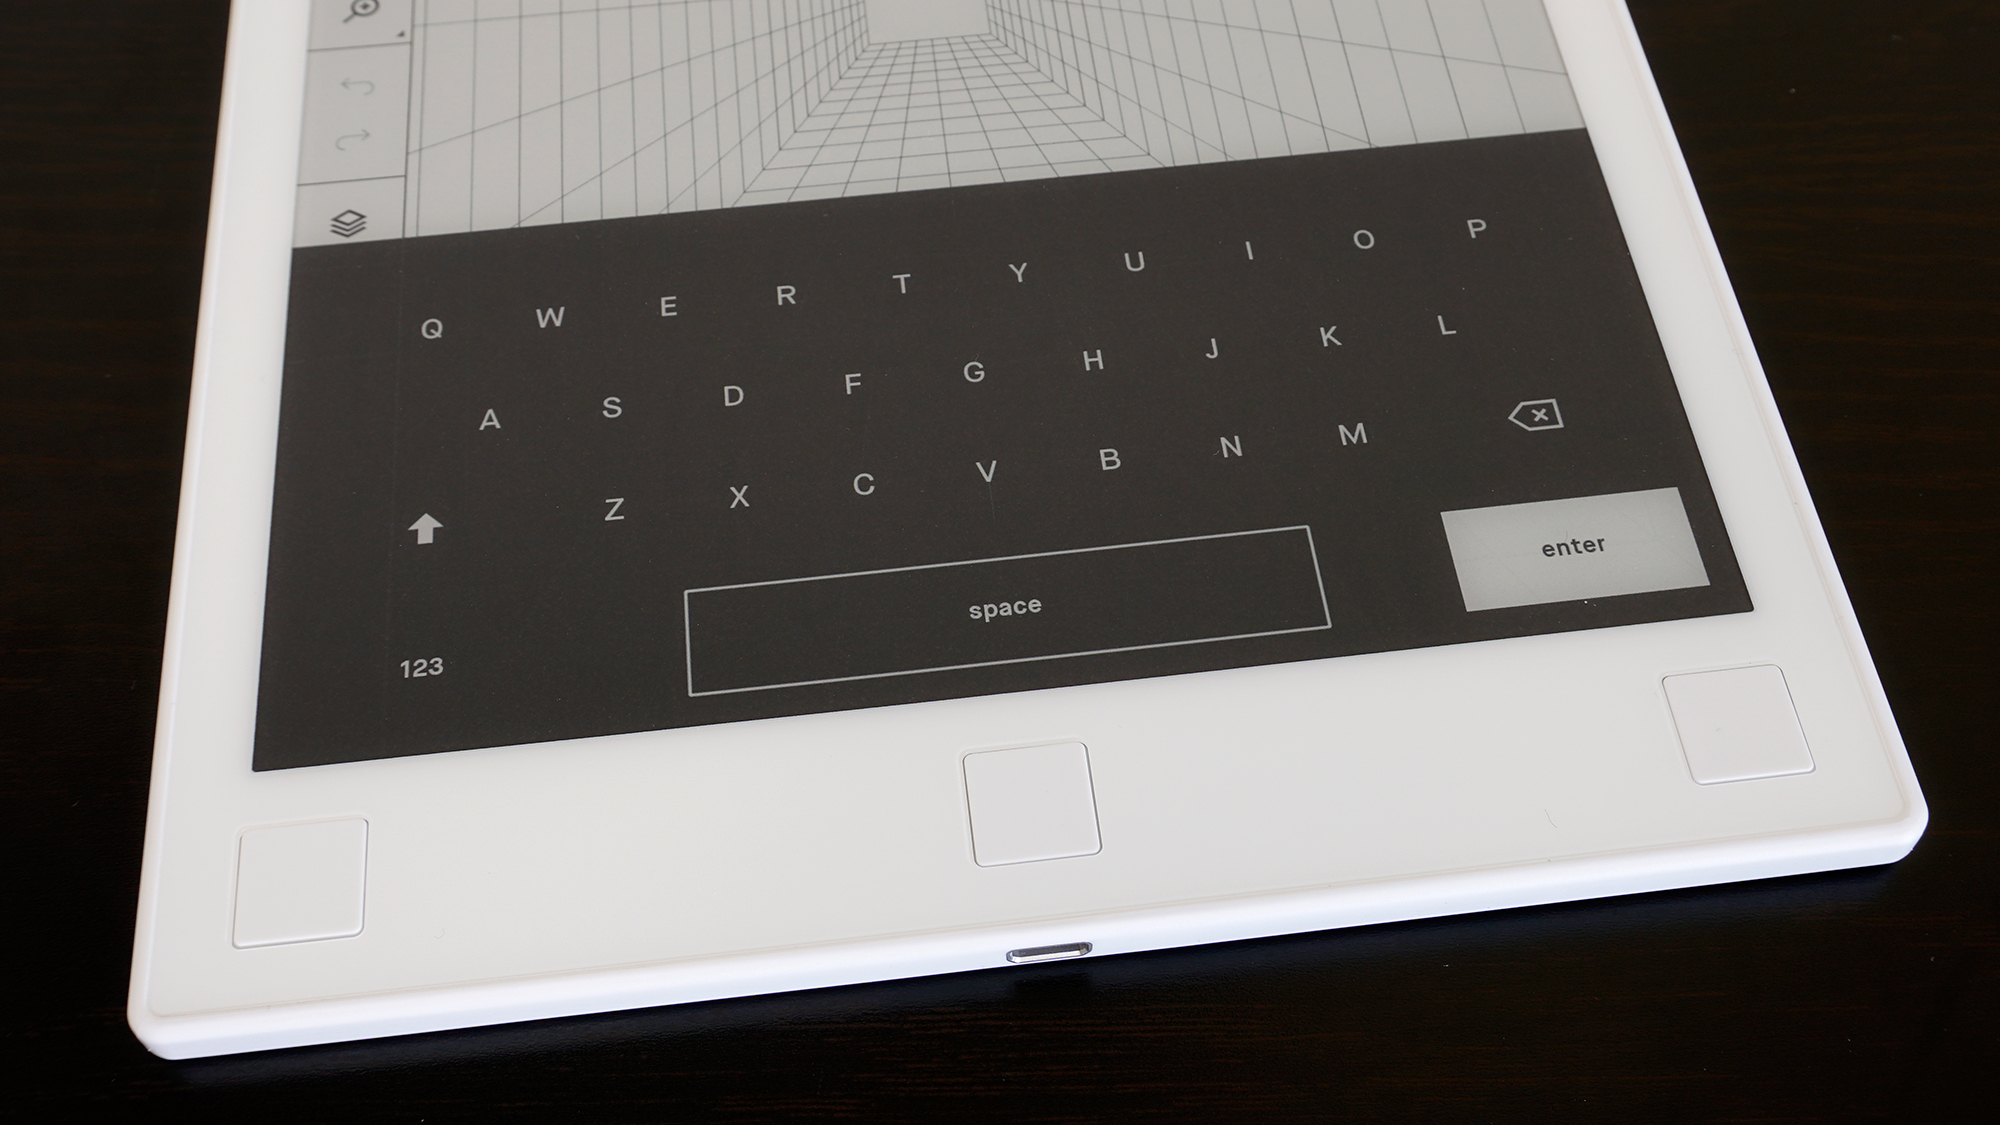 The ReMarkable 2 E Ink tablet is close to flawless, but it's